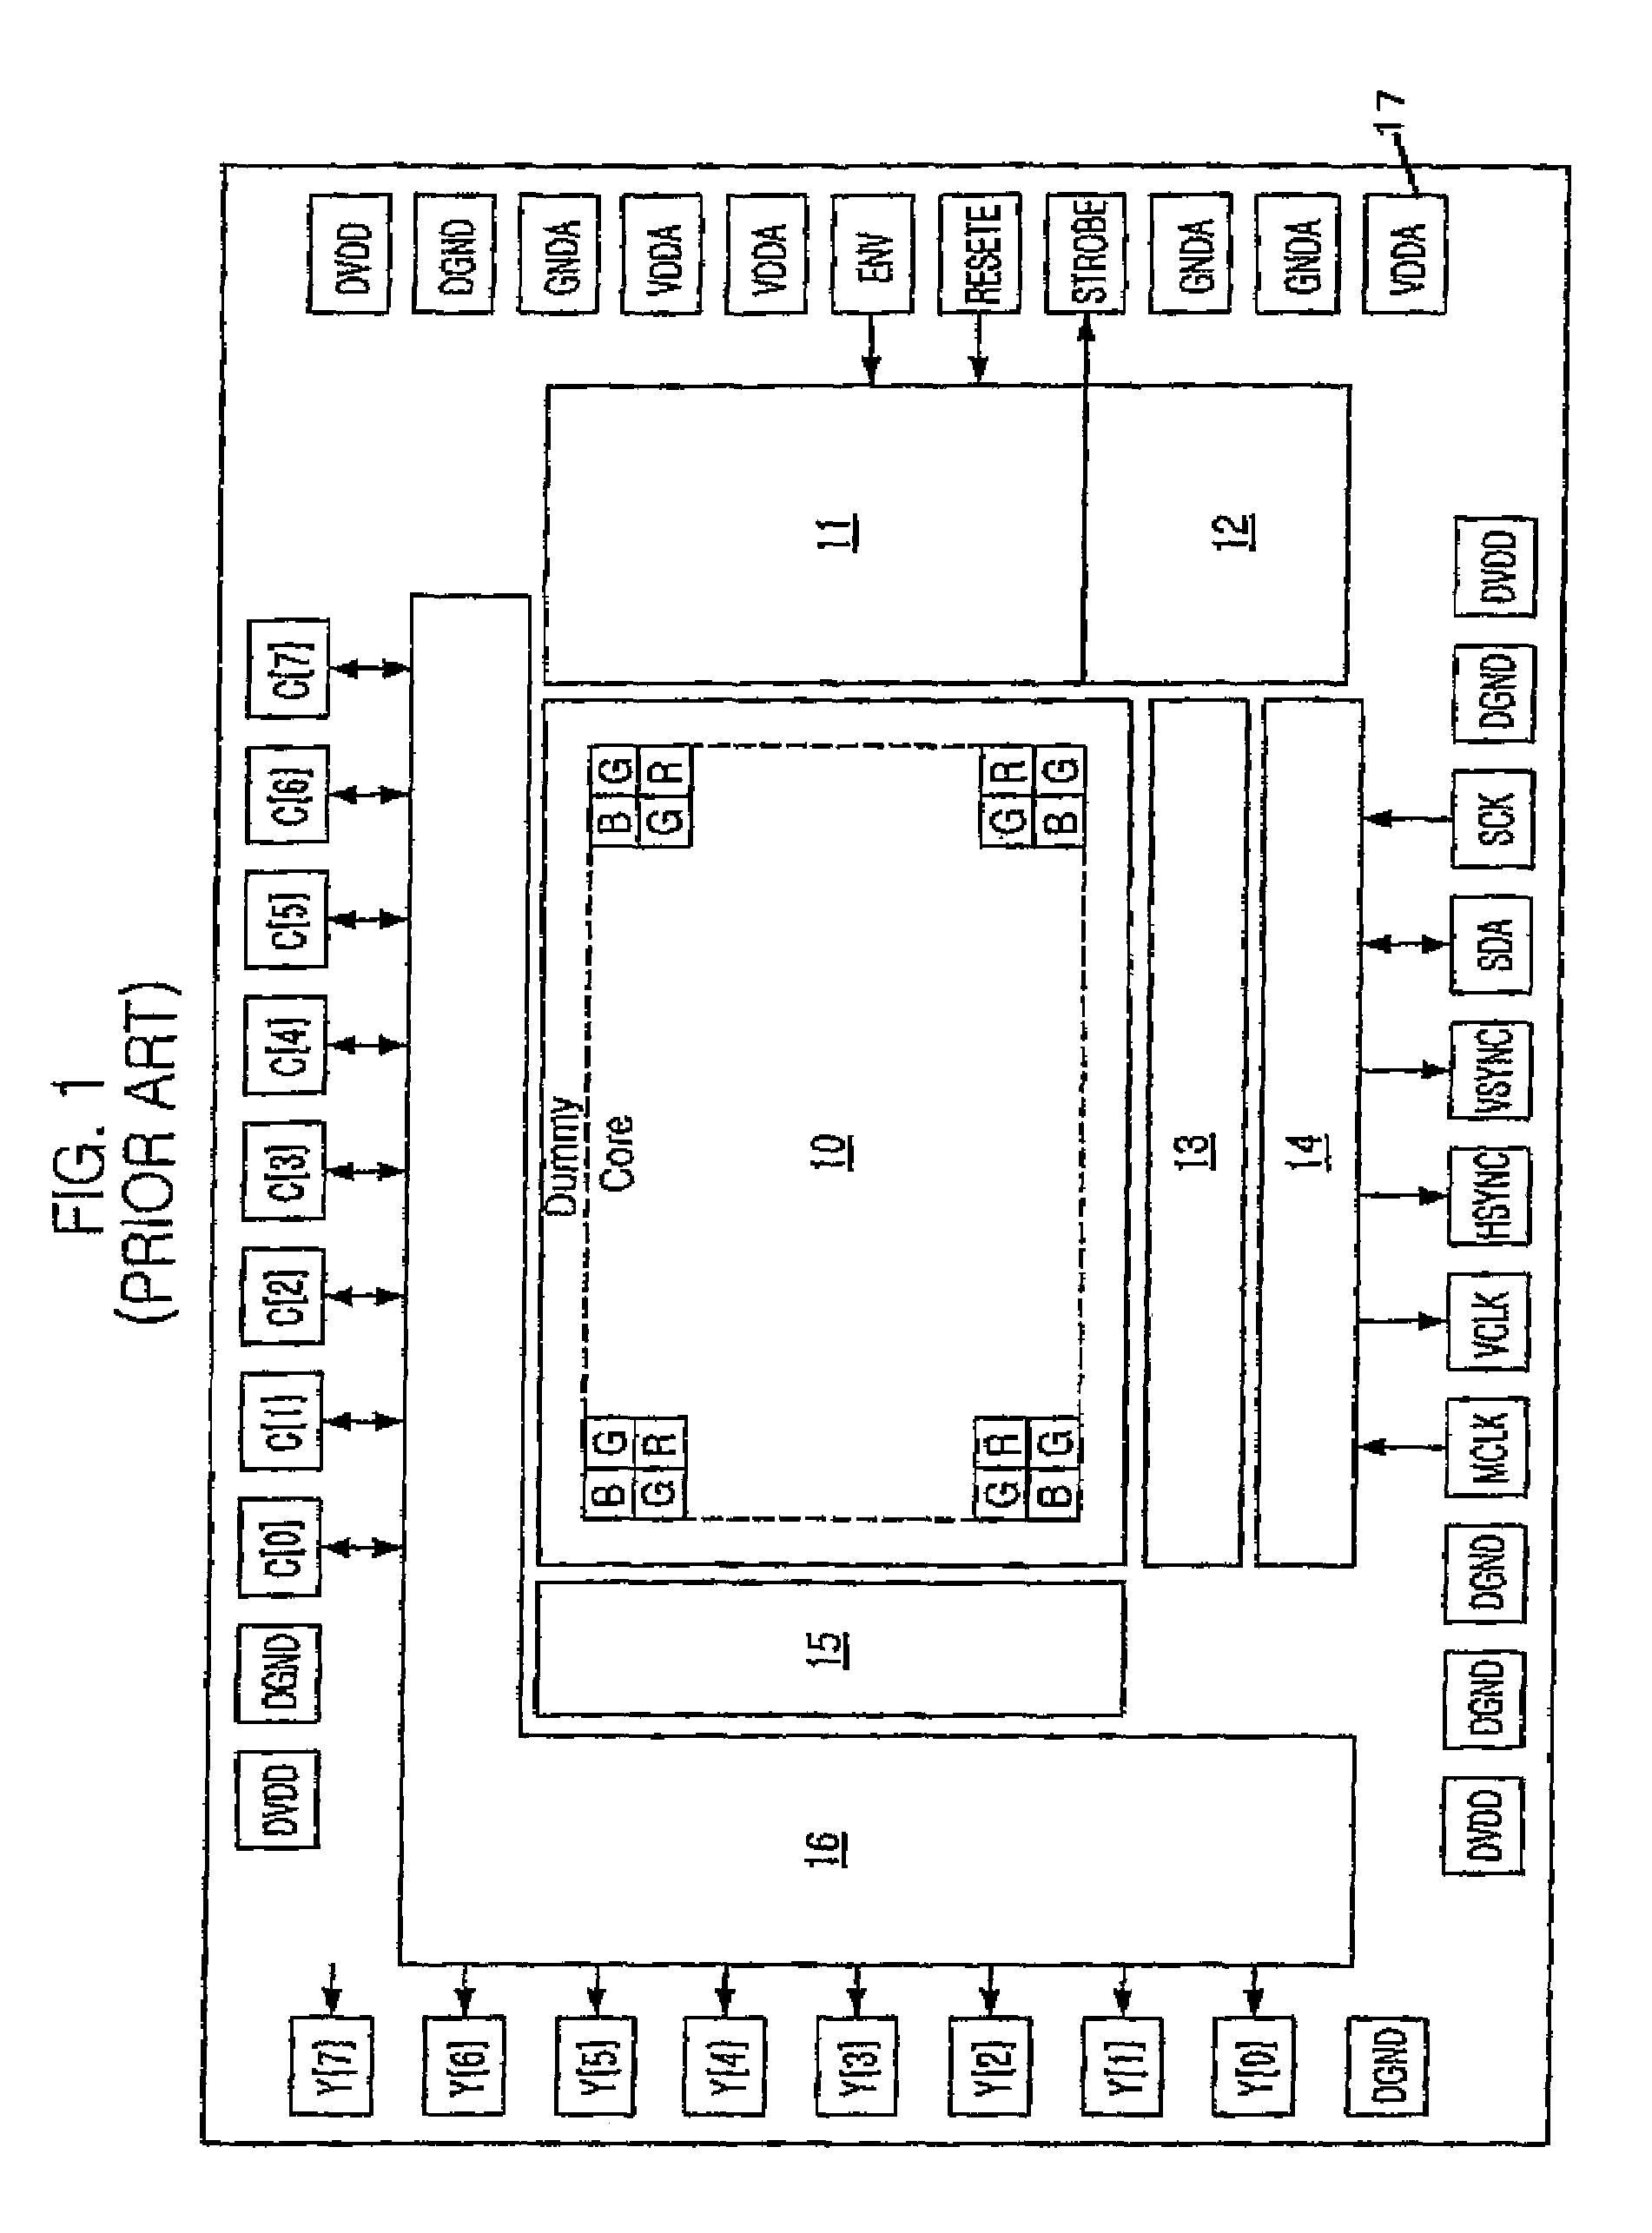 Image sensor with stacked and bonded photo detection and peripheral circuit substrates